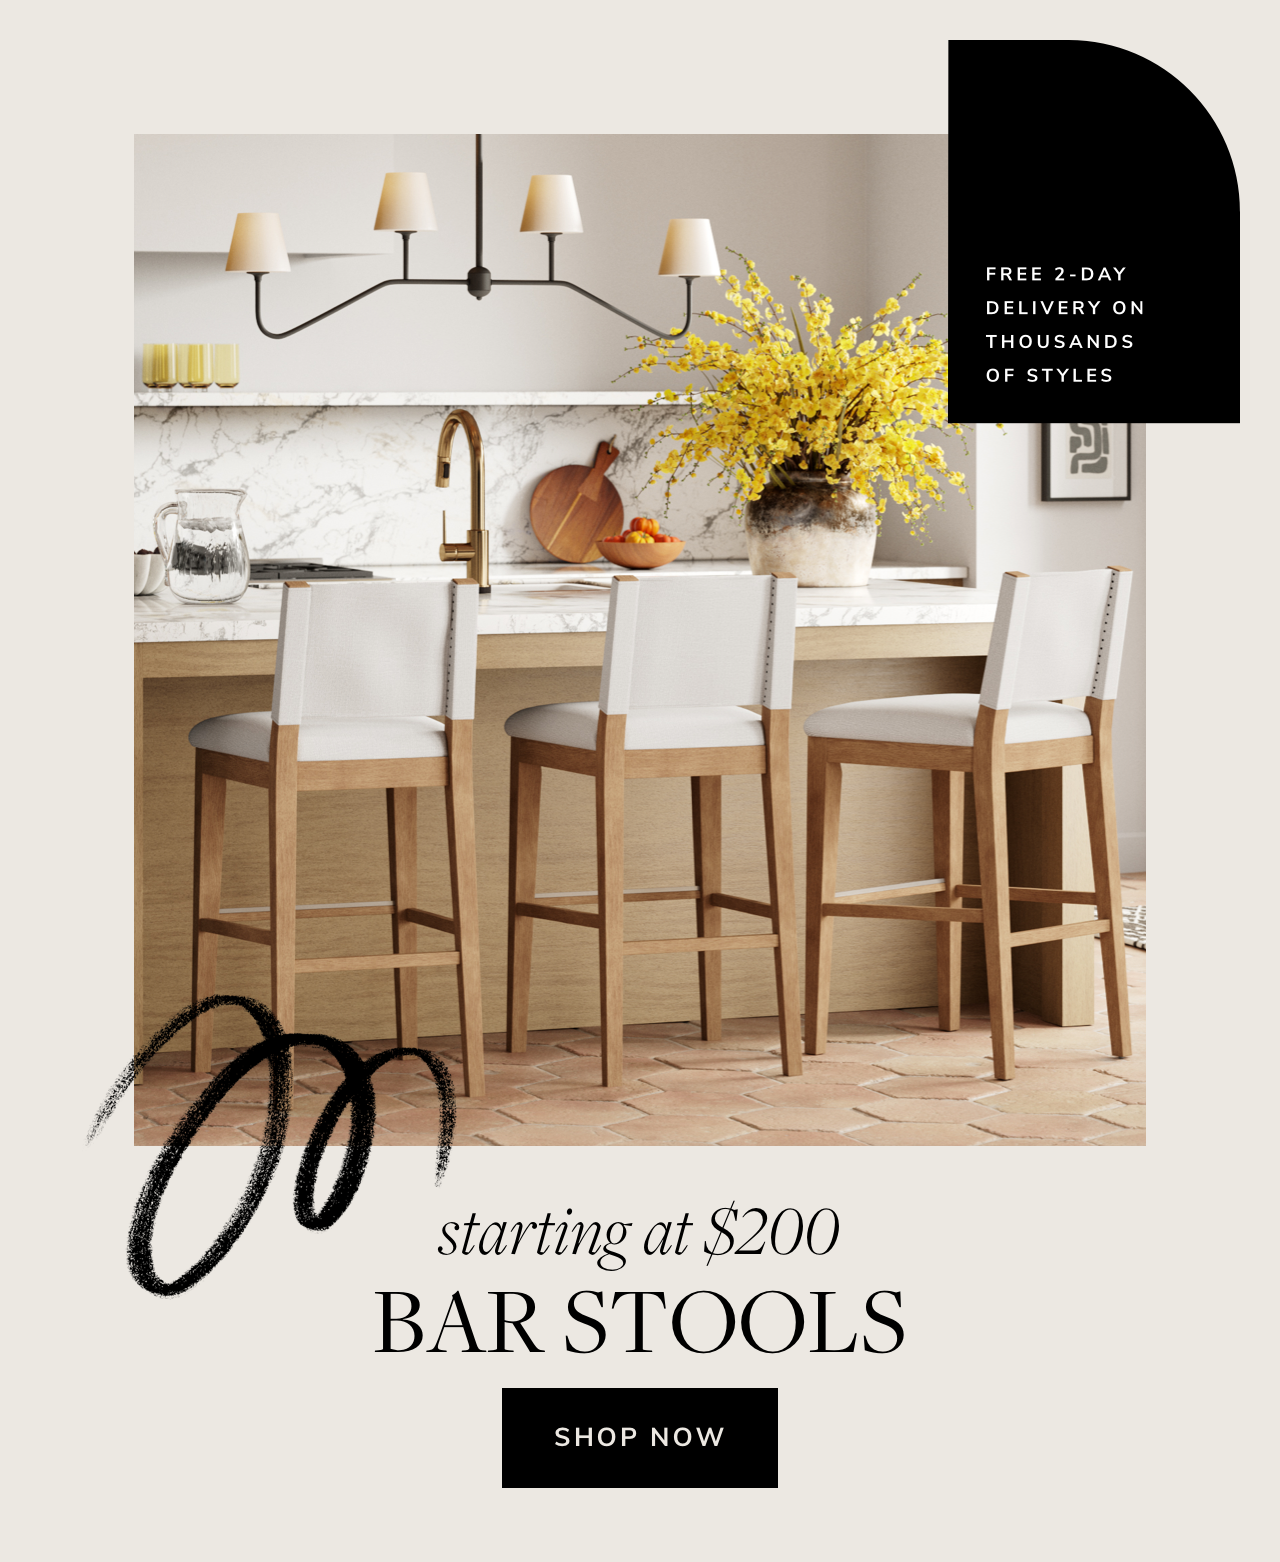 FREE 2-DAY DELIVERY ON THOUSANDS OF STYLES mm'ng at $200 BAR STOOLS SHOP NOW 